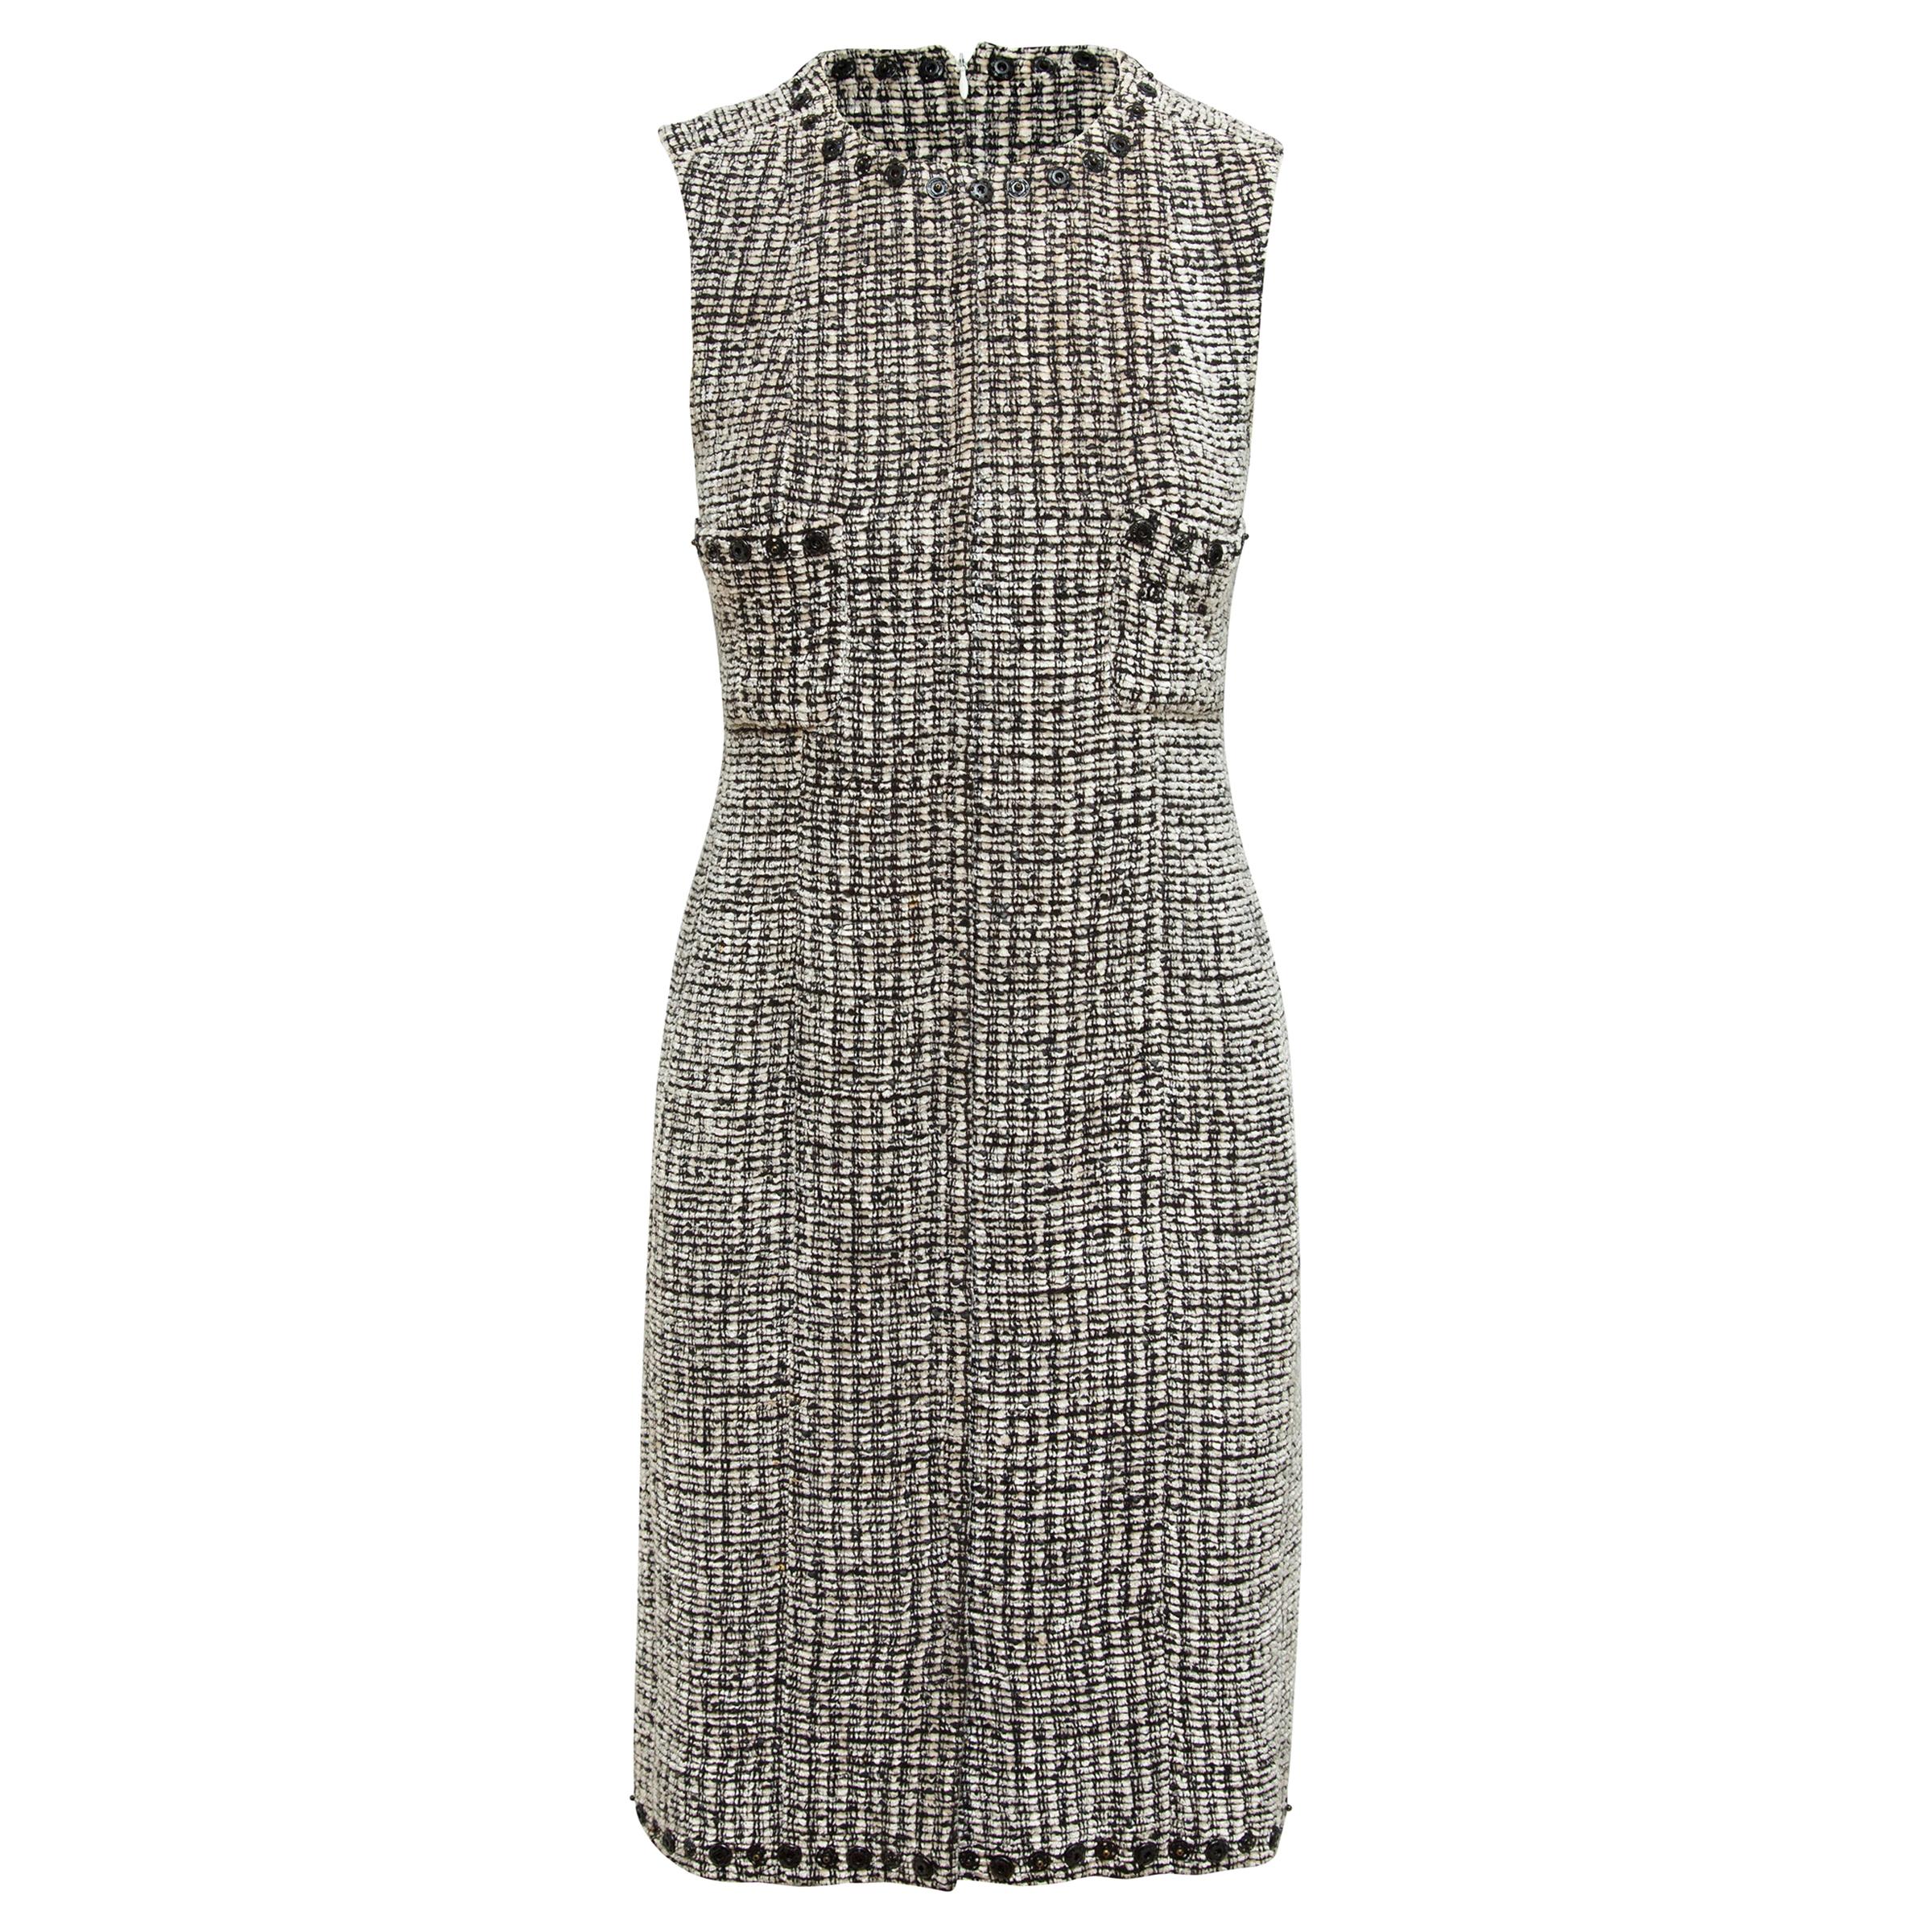 Chanel Fall 2002 Vintage Black and White Tweed Dress - 36 / 4